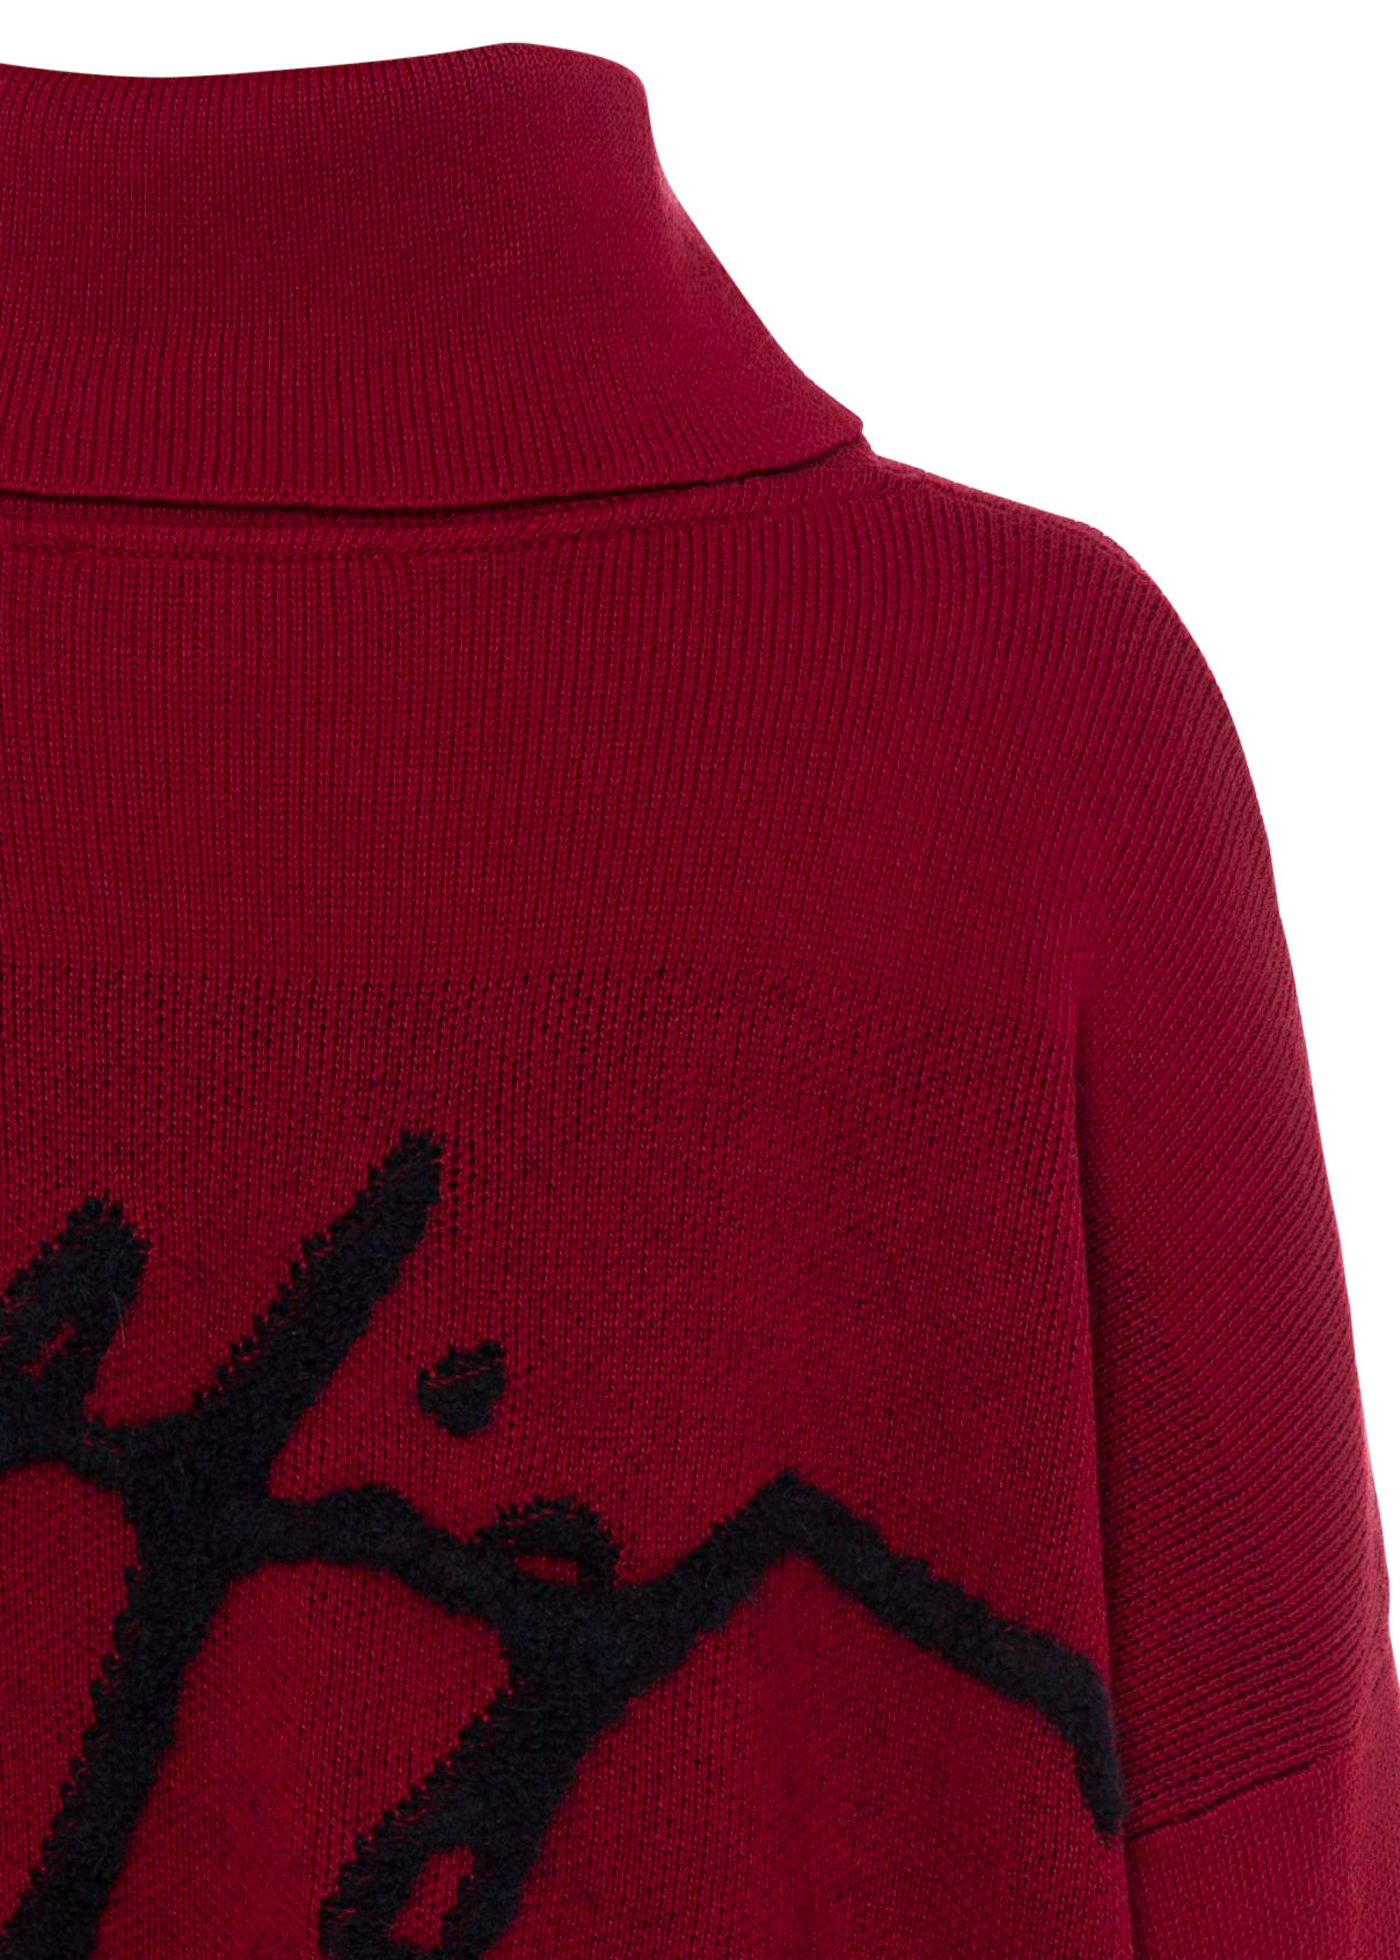 RELAXED TOMMY HIGH-NK SWEATER image number 3